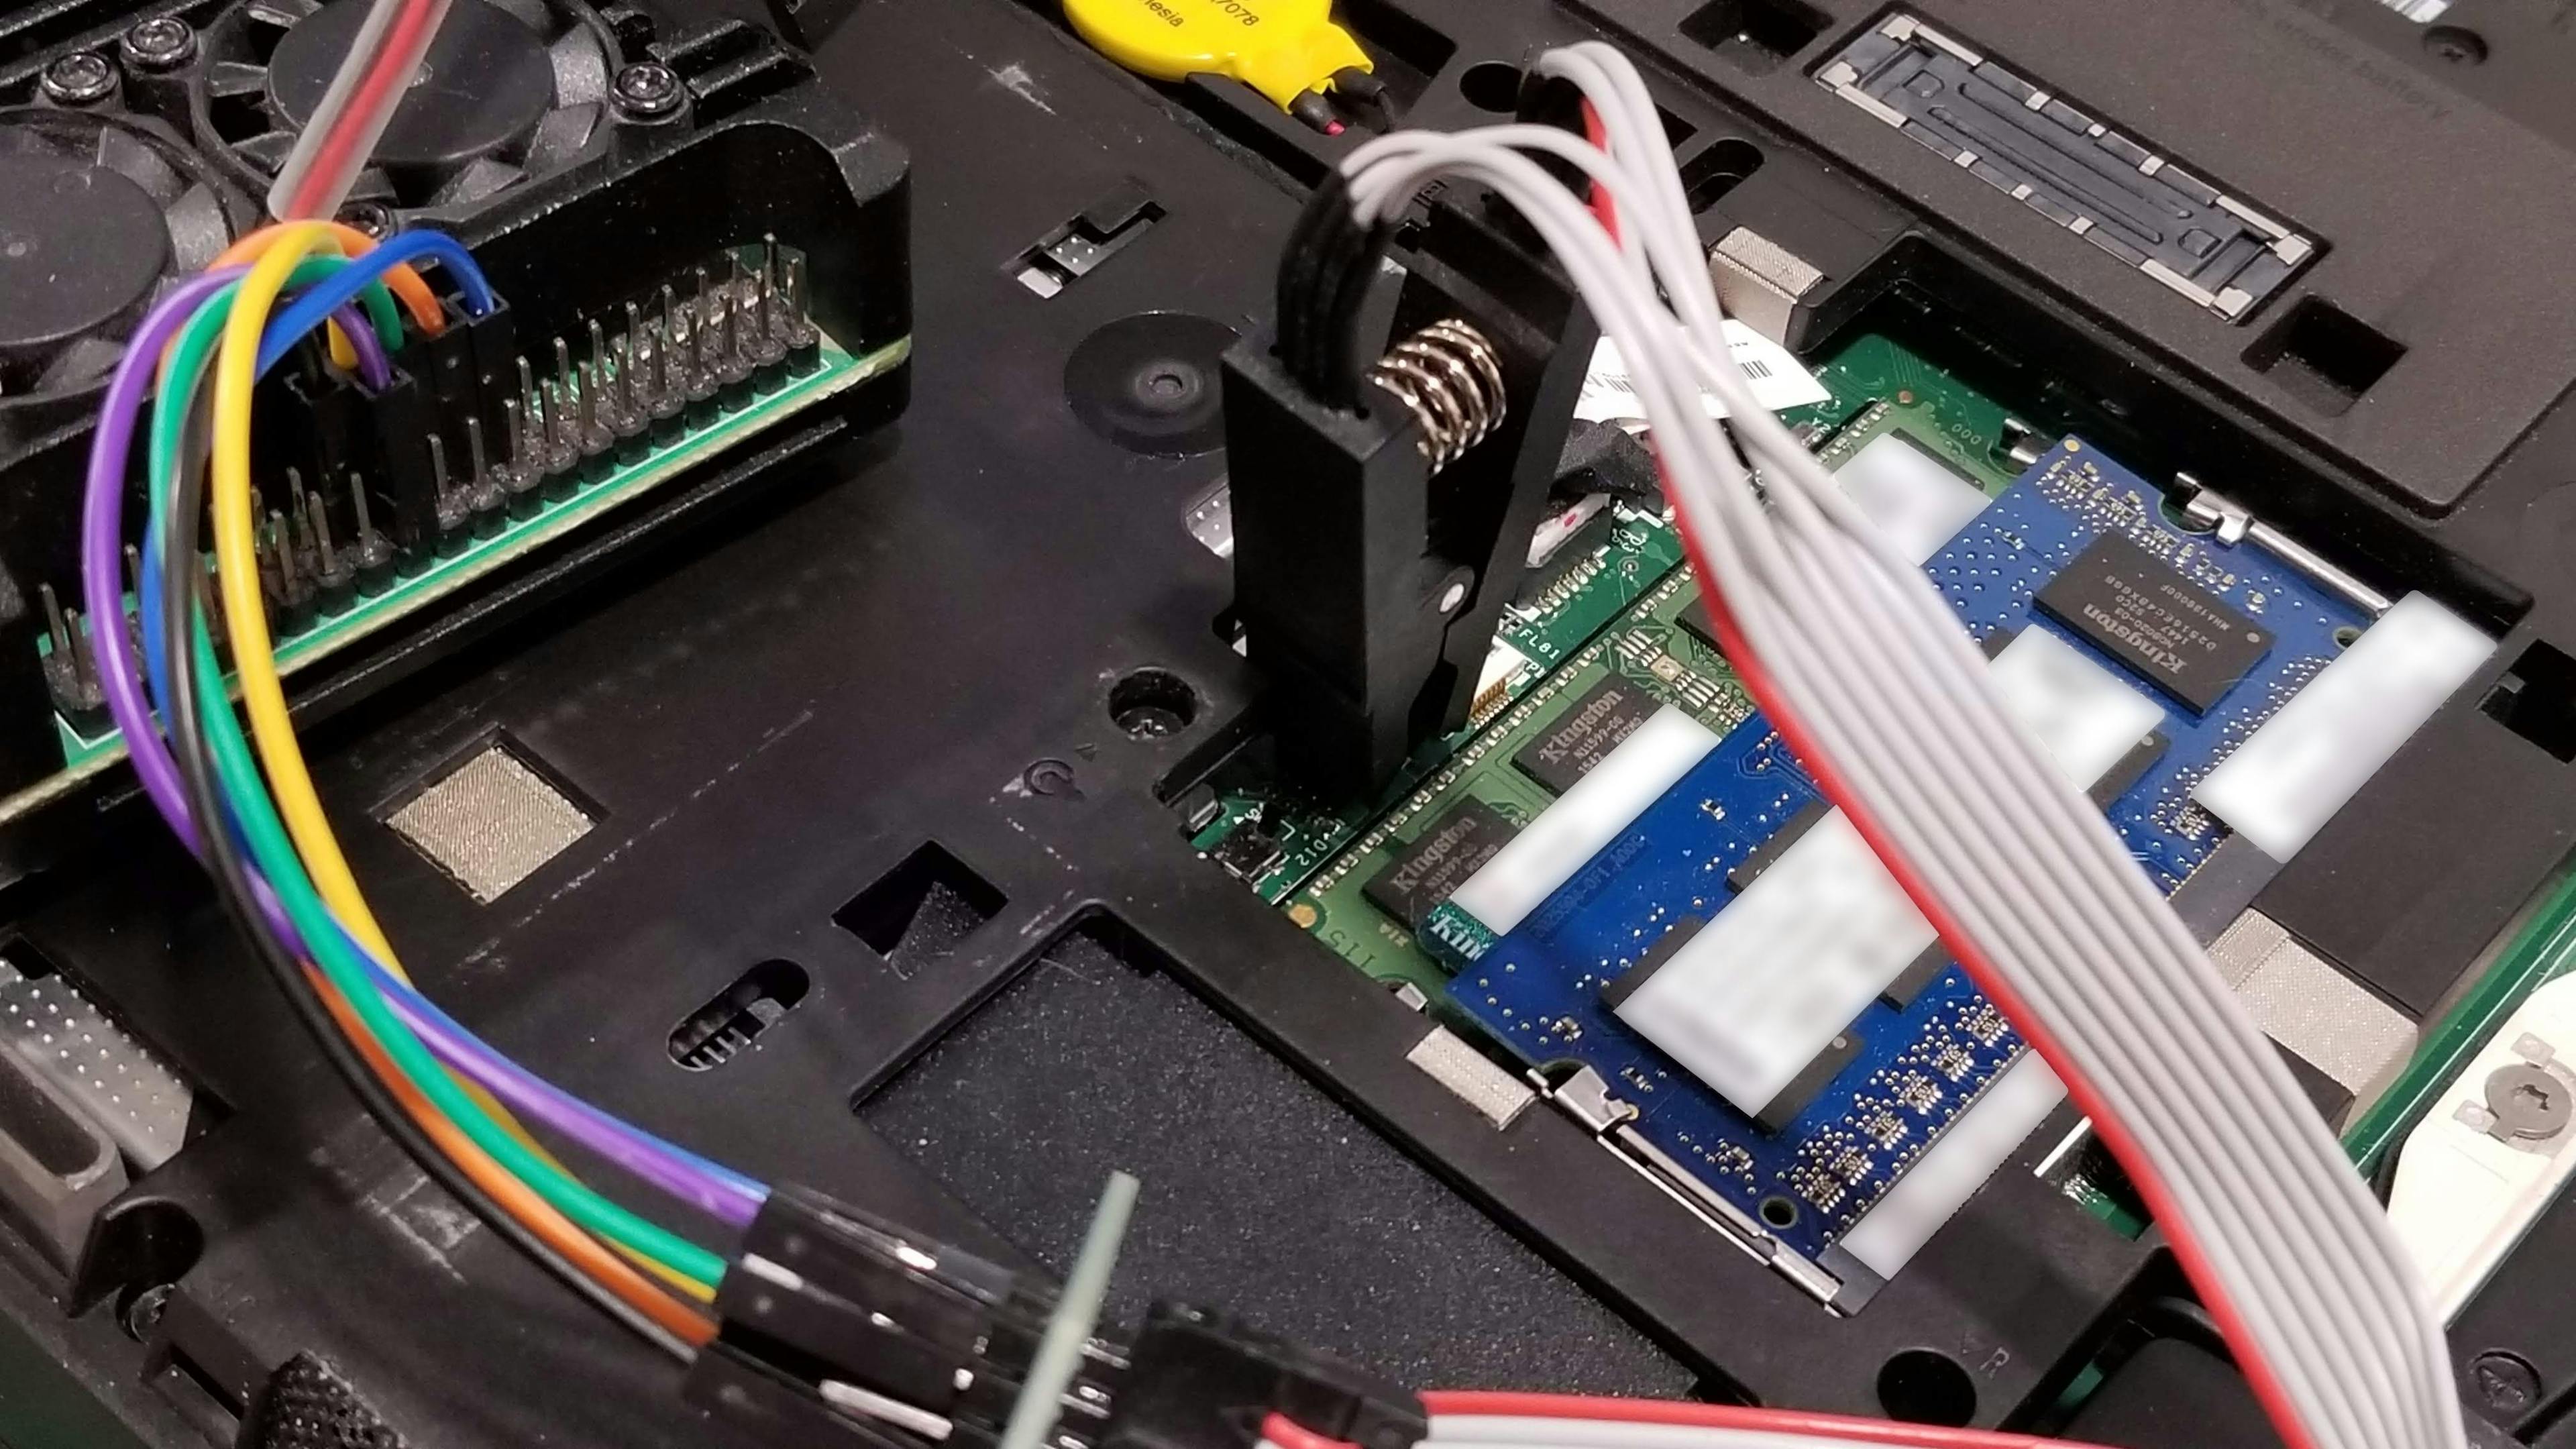 The BIOS chip being connected to the Raspberry Pi using wires.